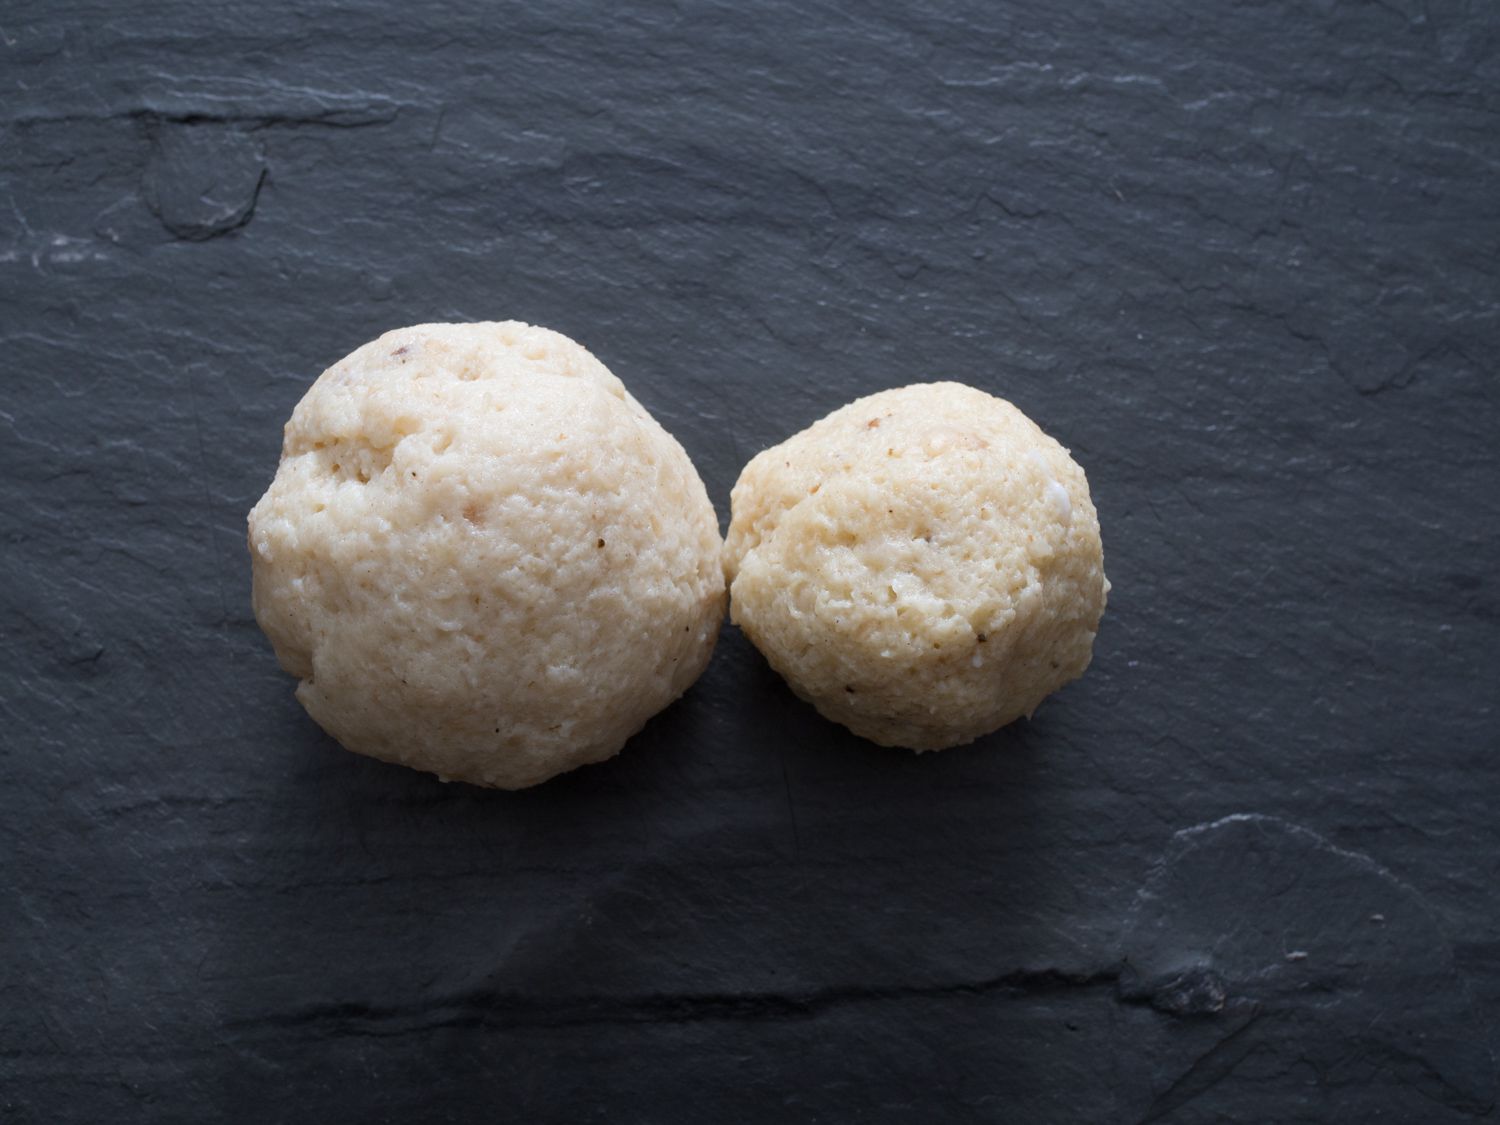 Two matzo balls. The ball on the left has a radius that's nearly half as large as the ball on the right.